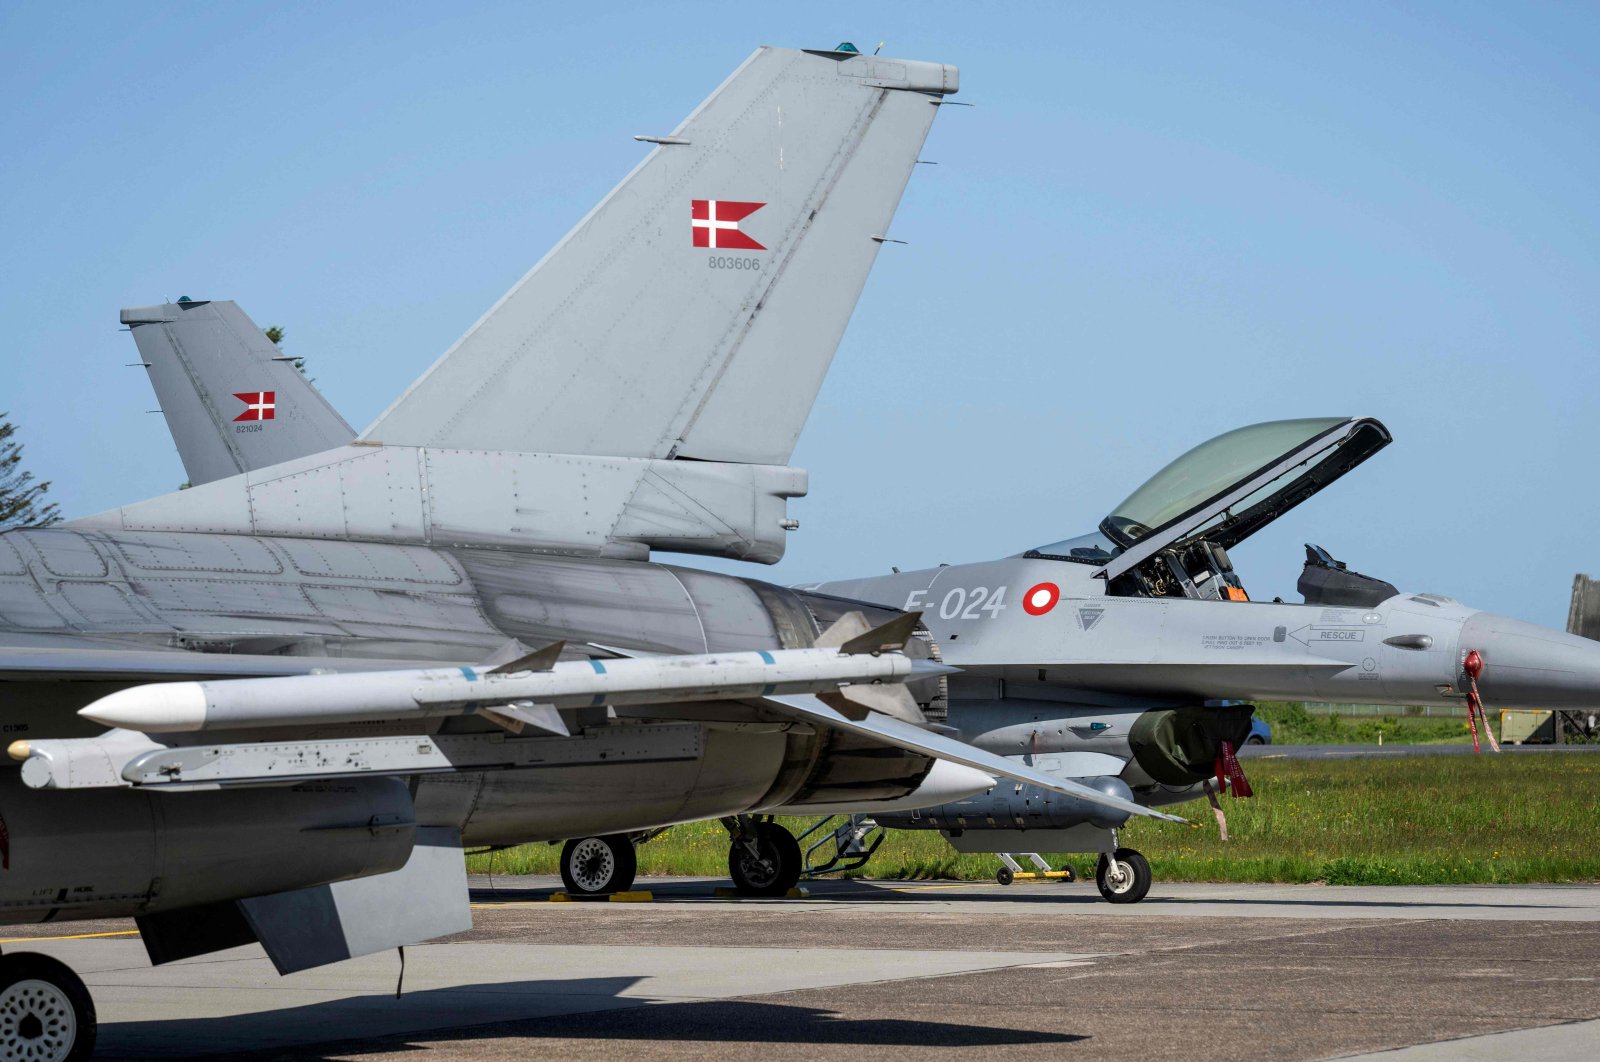 A Danish F-16 fighter jet is pictured at the Fighter Wing Skrydstrup Air Base near Vojens, Denmark, May 25, 2023. (AFP Photo)